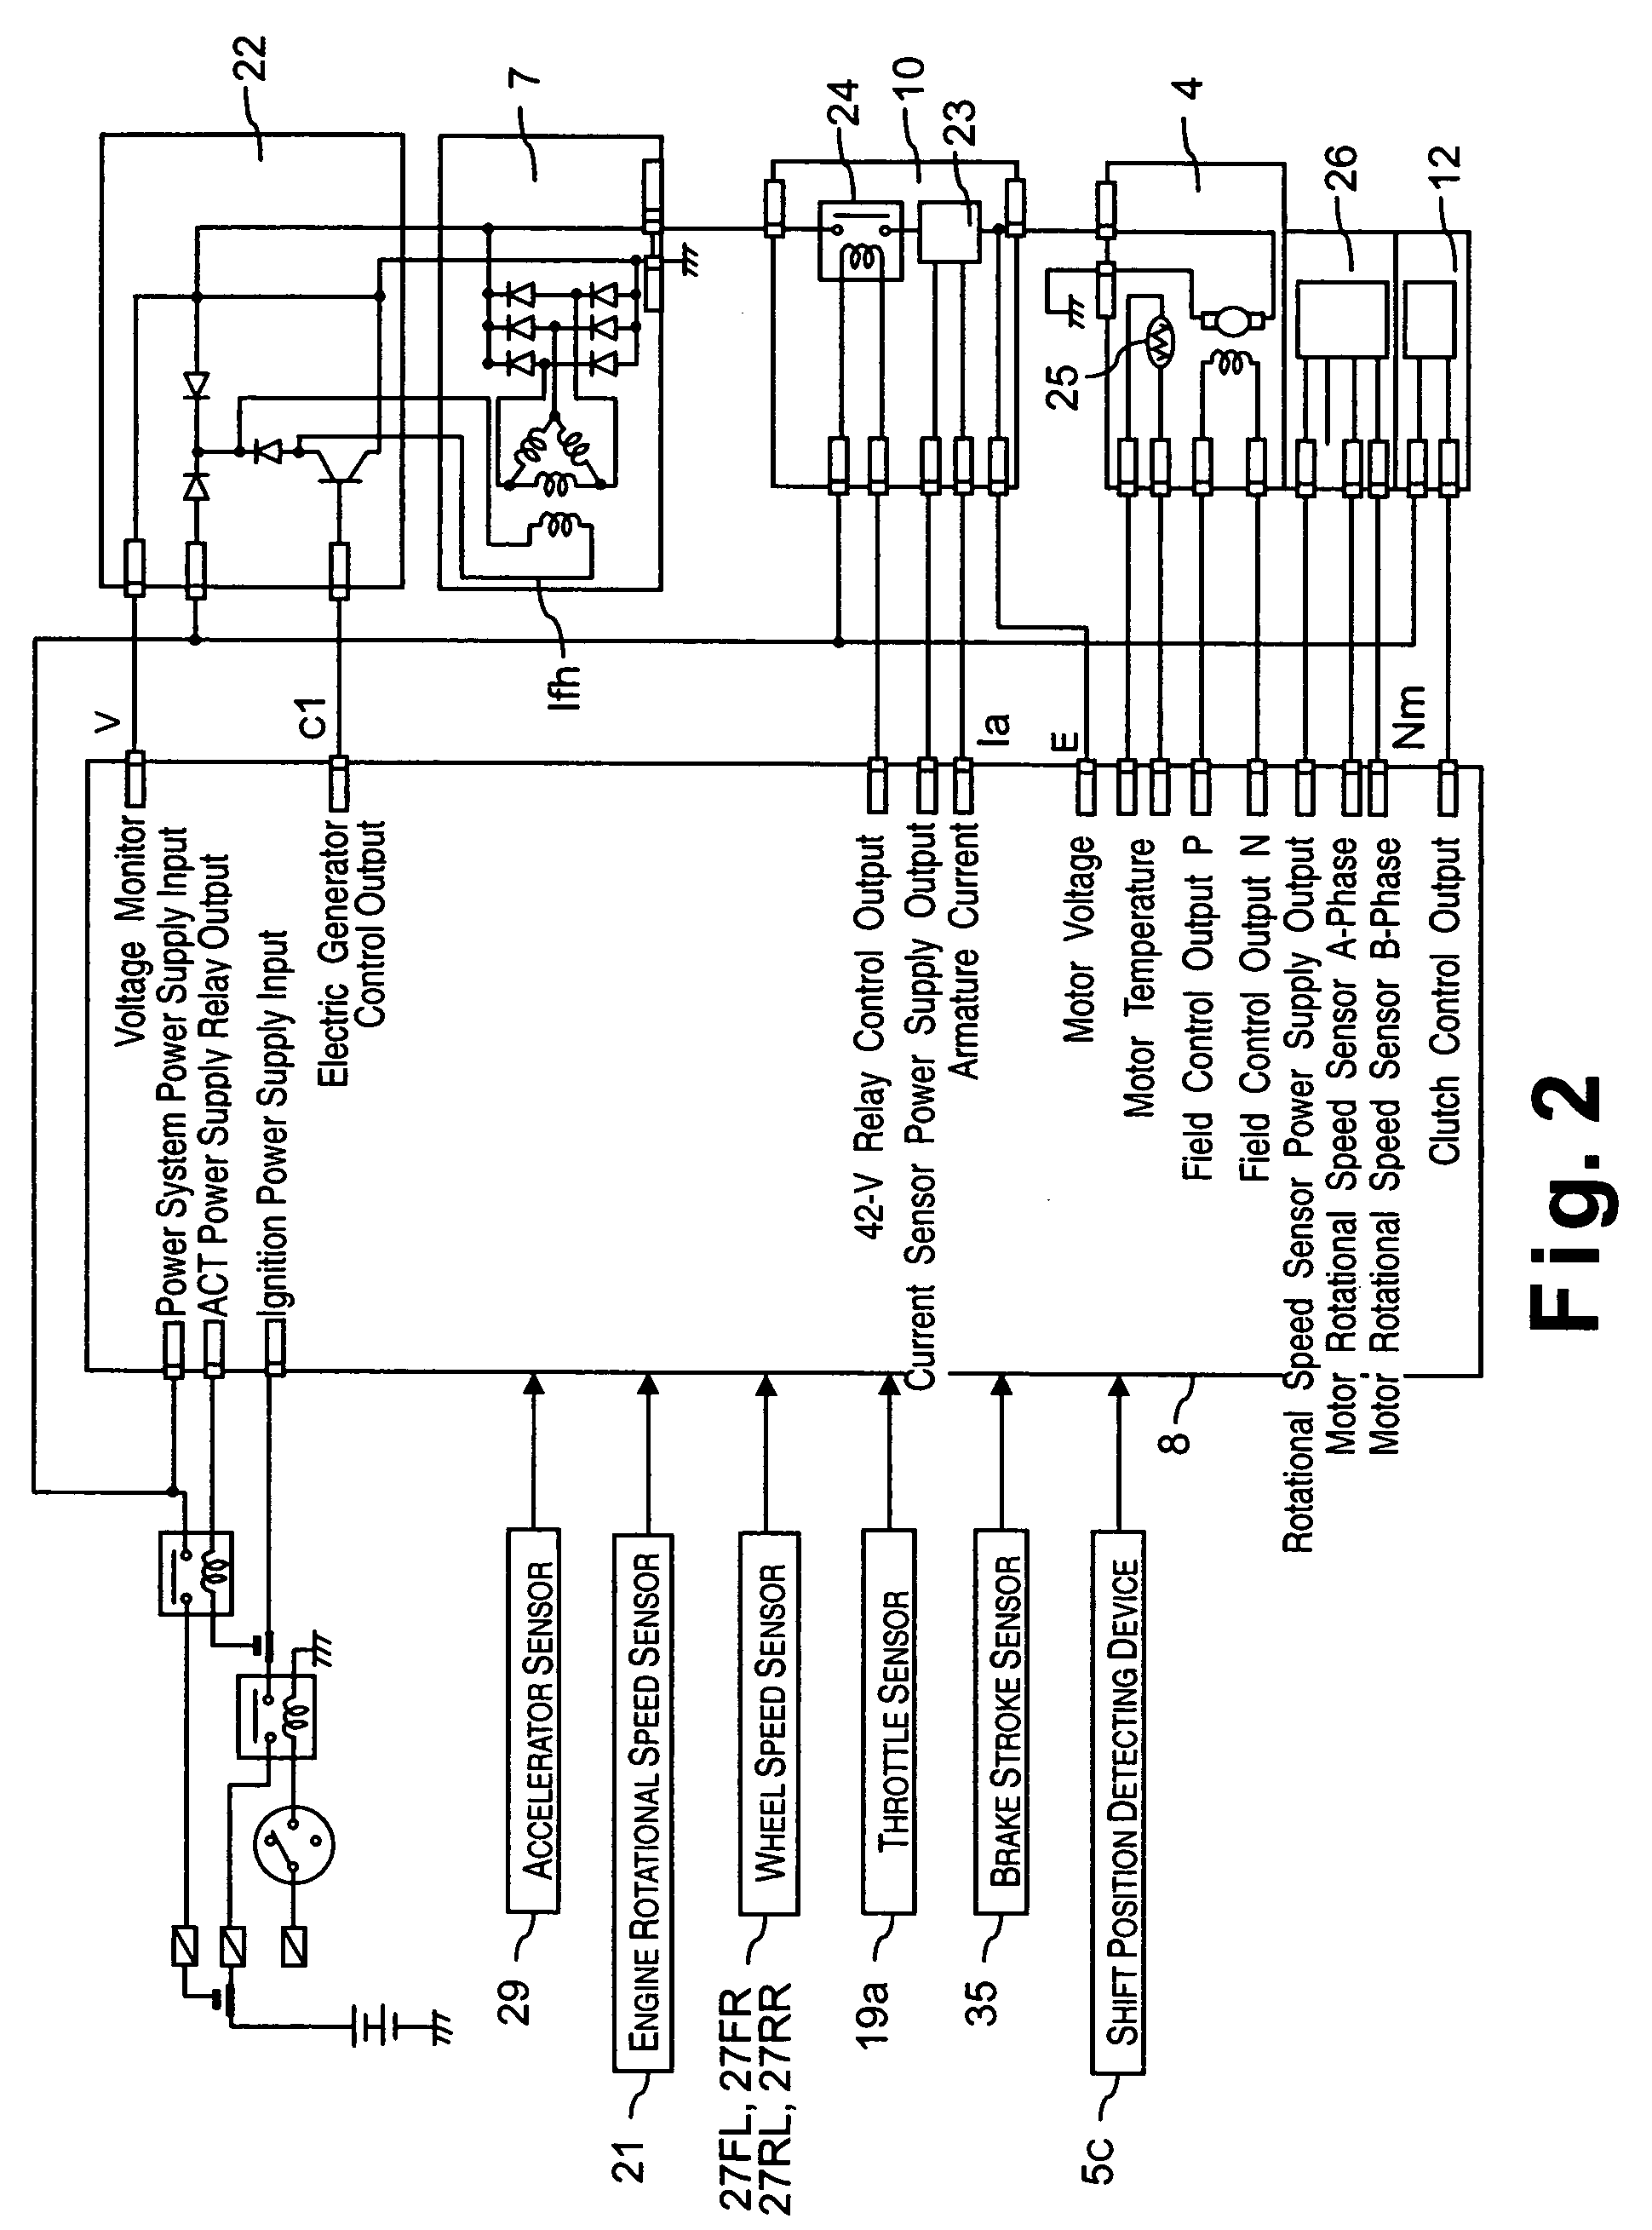 Vehicle drive force control apparatus